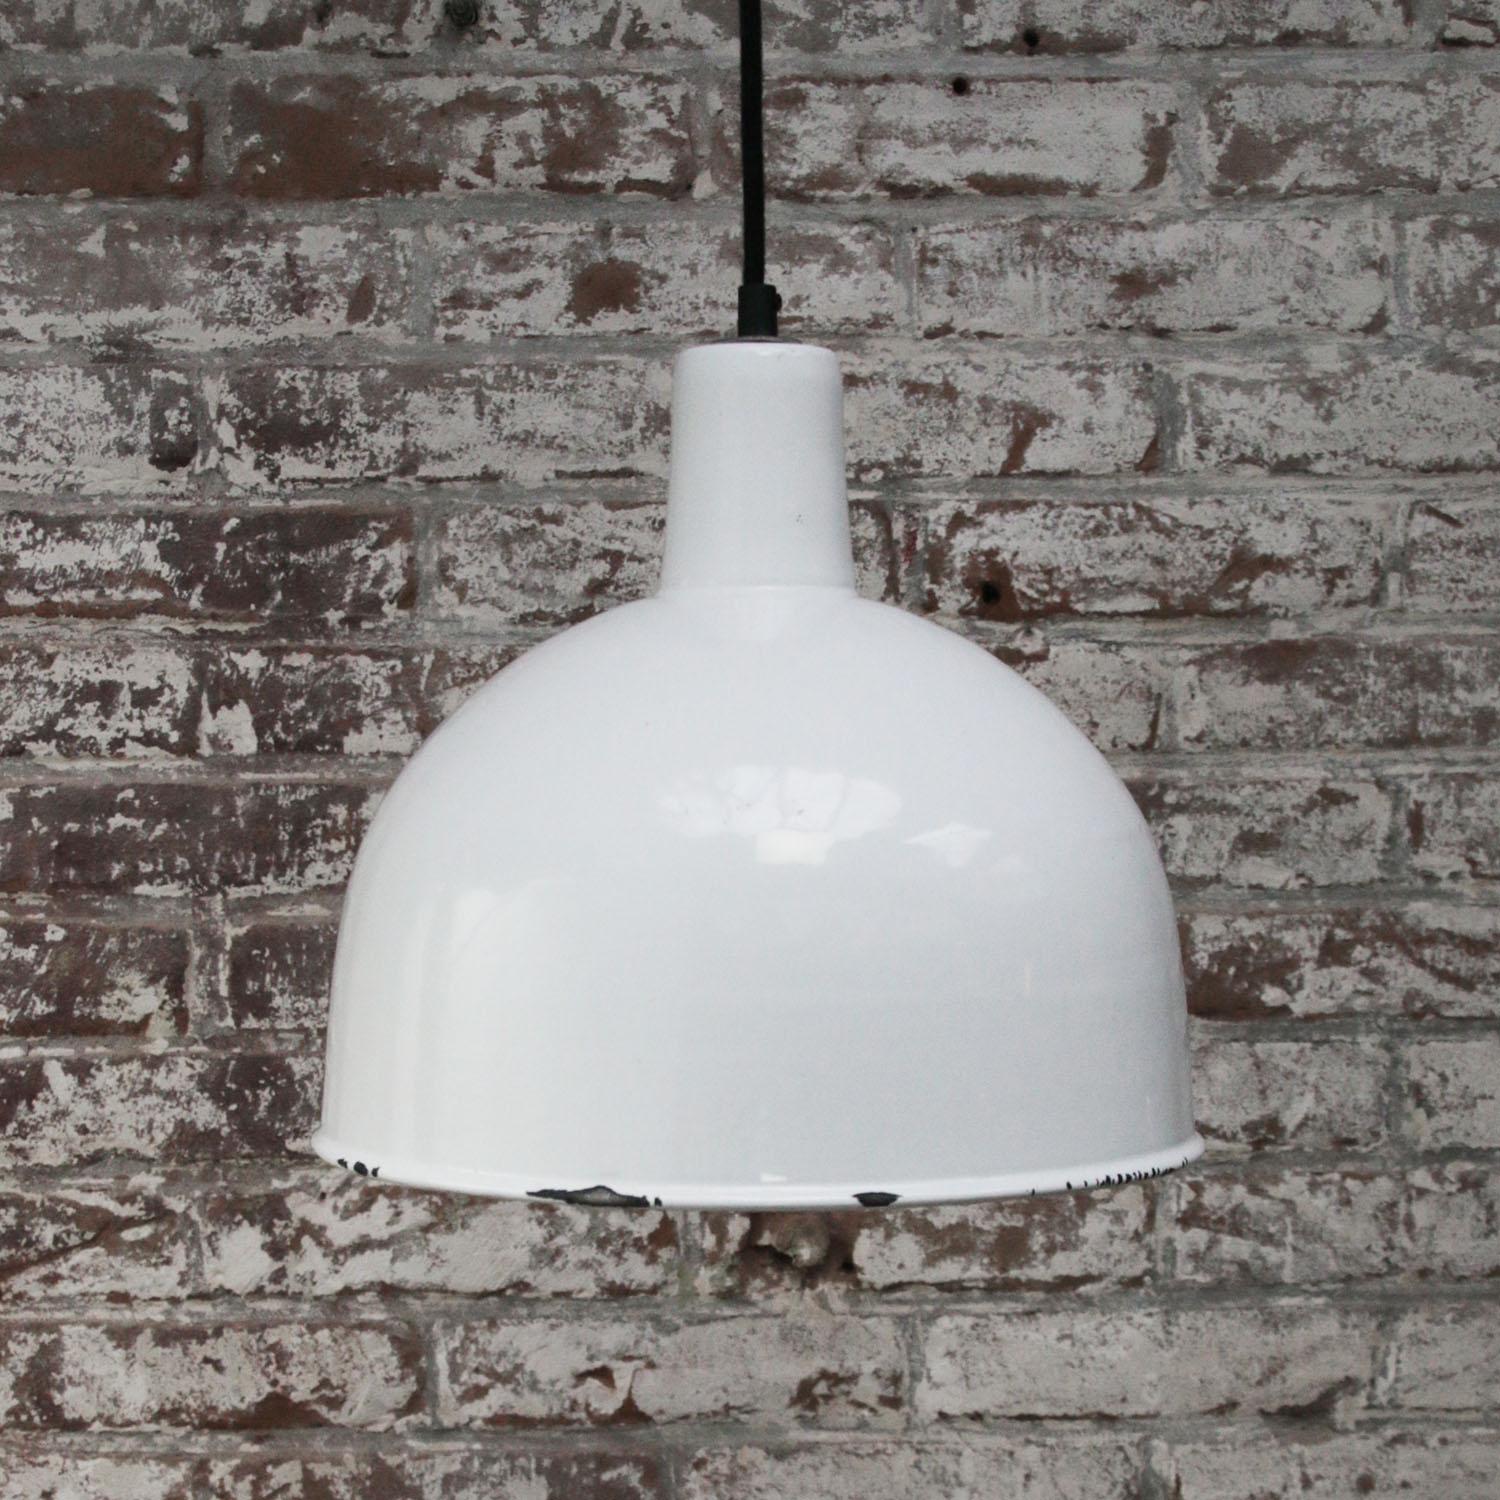 White Enamel Vintage Industrial Factory Hanging Light Pendant In Good Condition For Sale In Amsterdam, NL